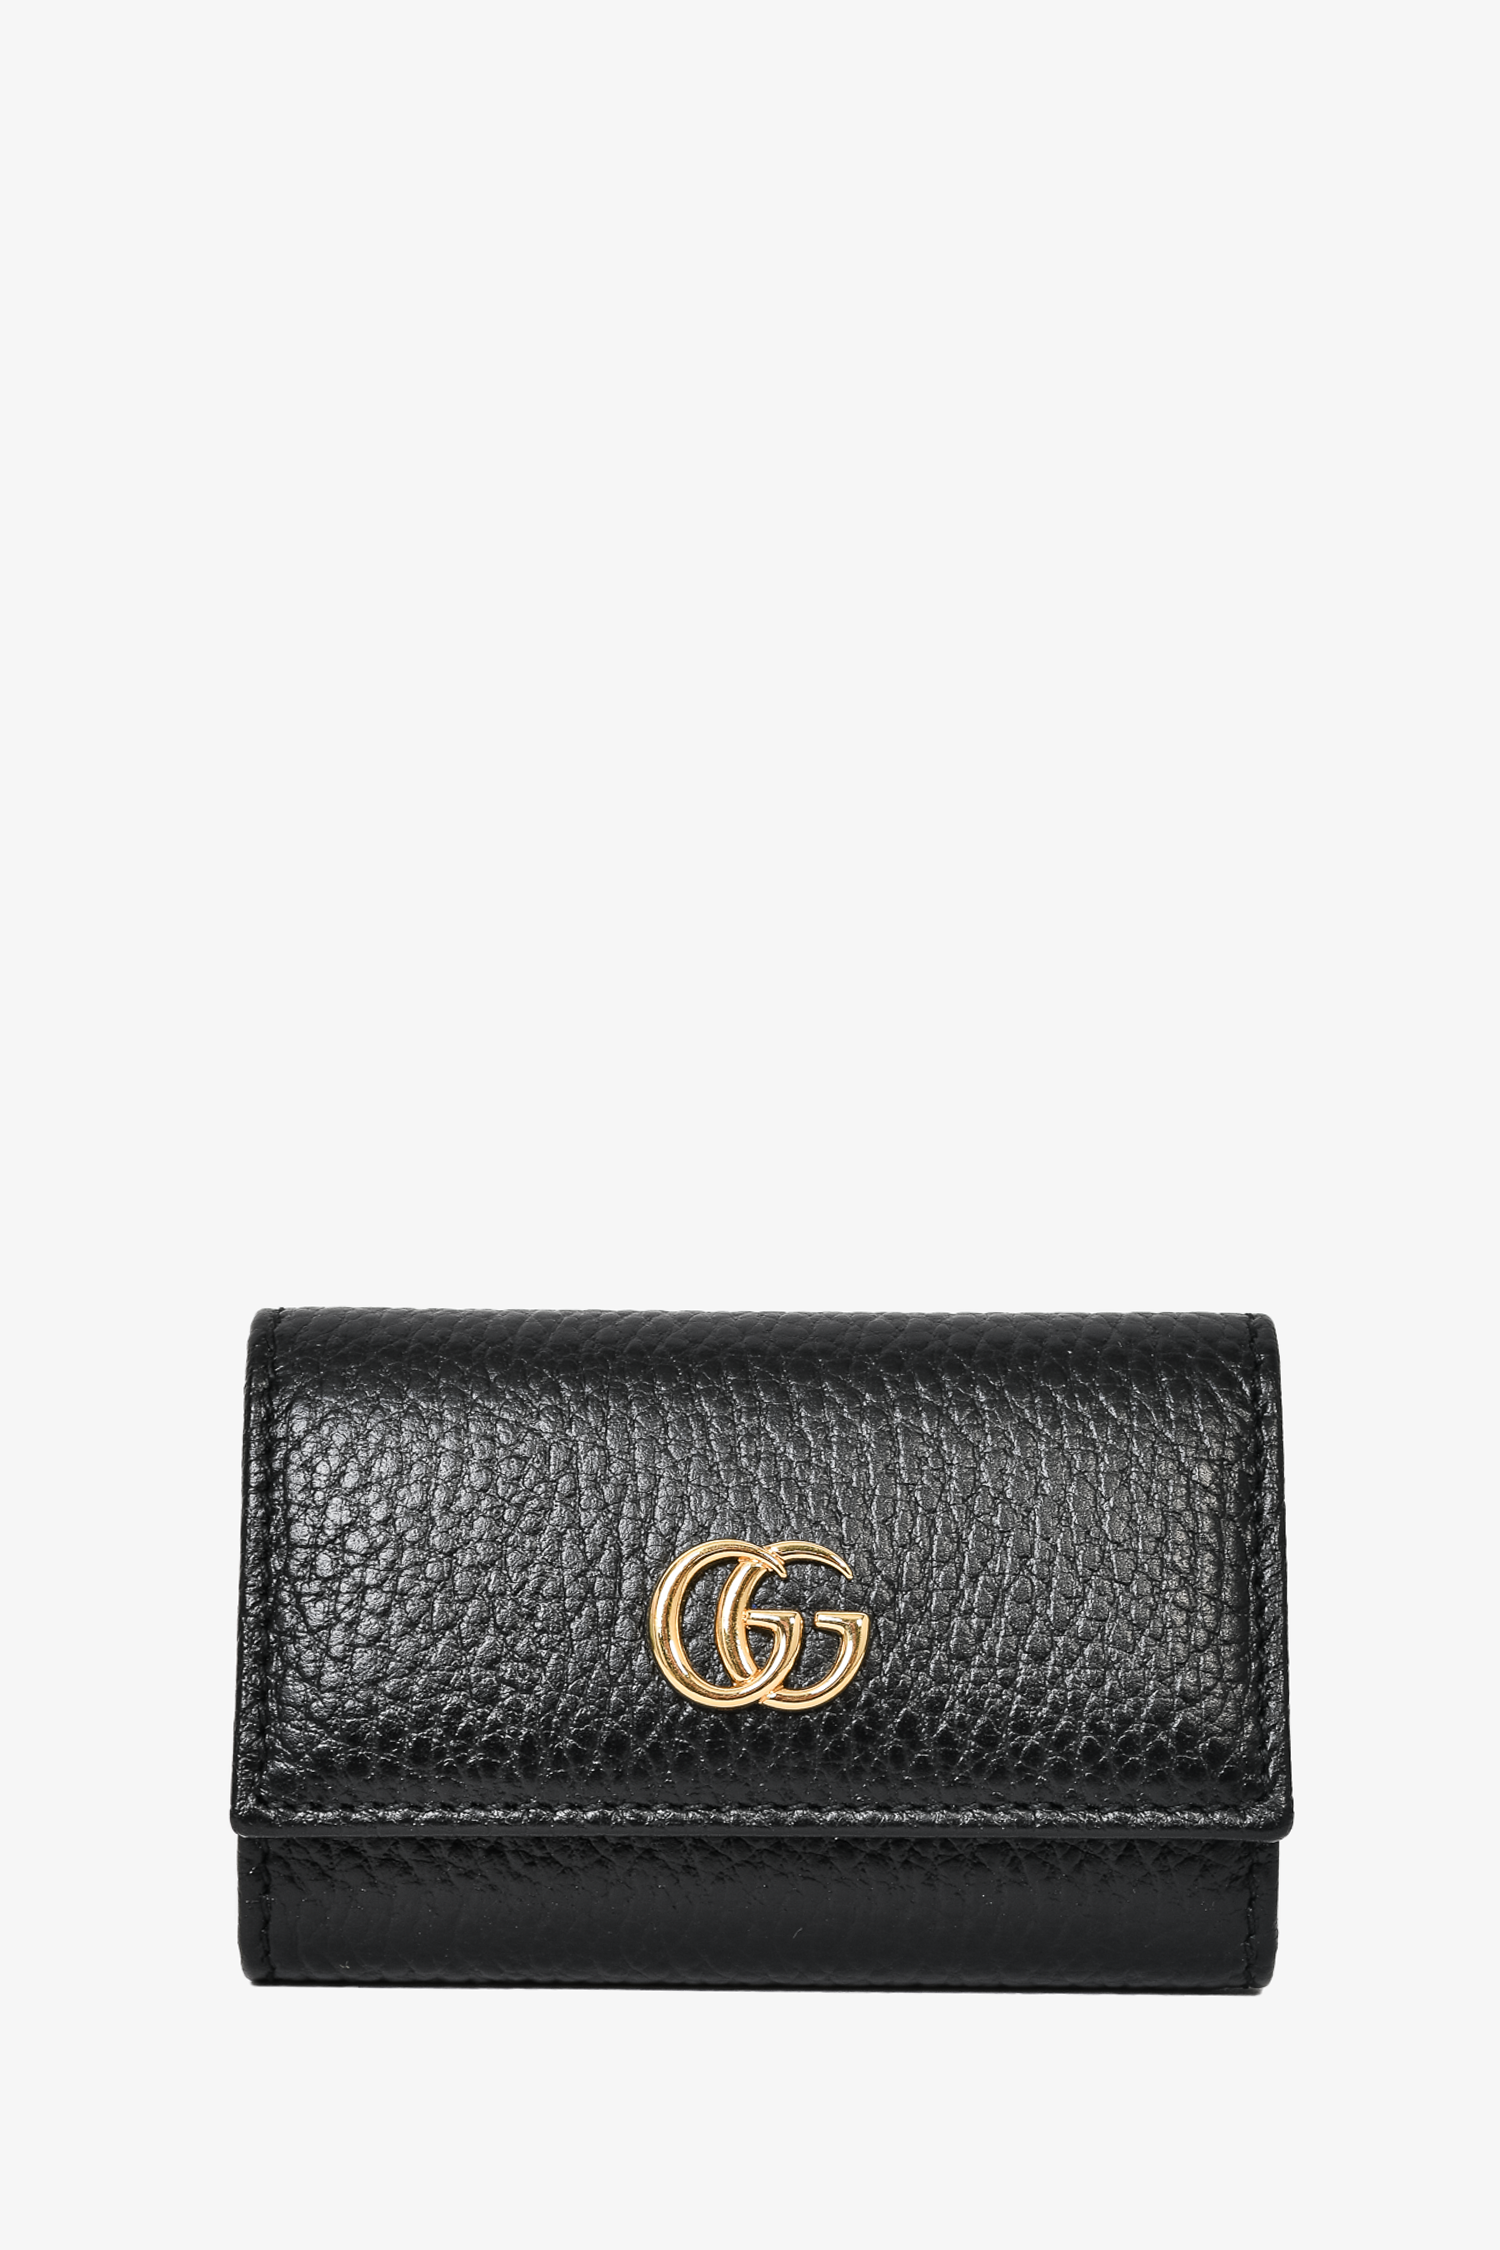 Gucci Horse Bit Leather 6 Ring Key Case